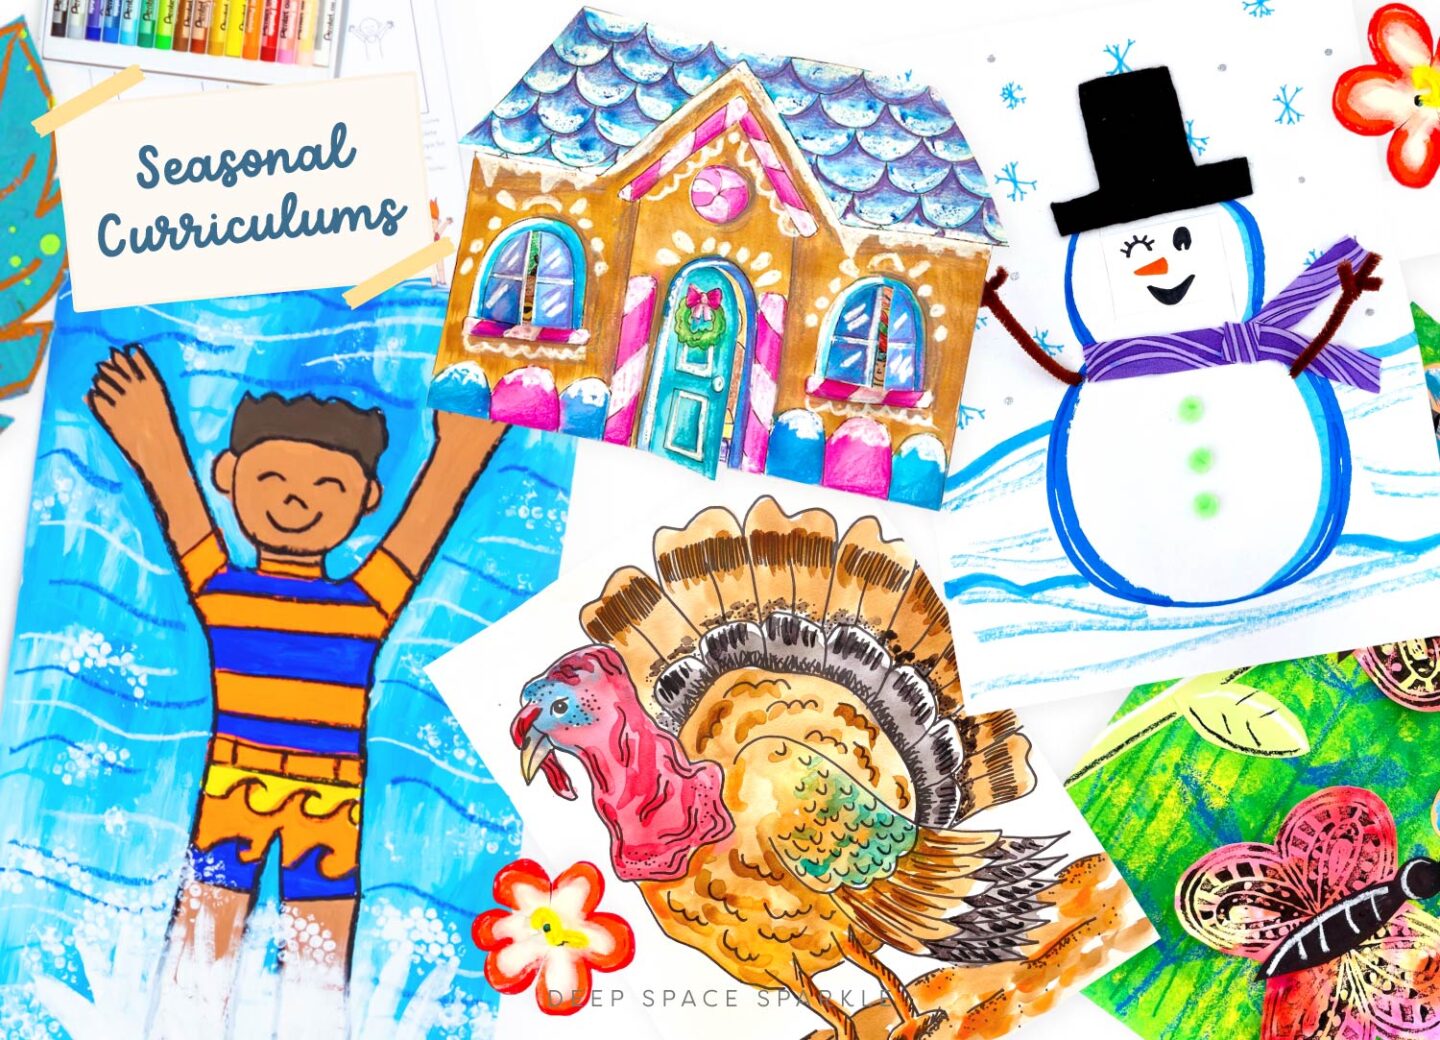 The Ultimate Guide on Designing an Art Curriculum with How-To Download for Art Teachers. Craft, Implement and Teach a Successful Seasonal Elementary Art Curriculum.